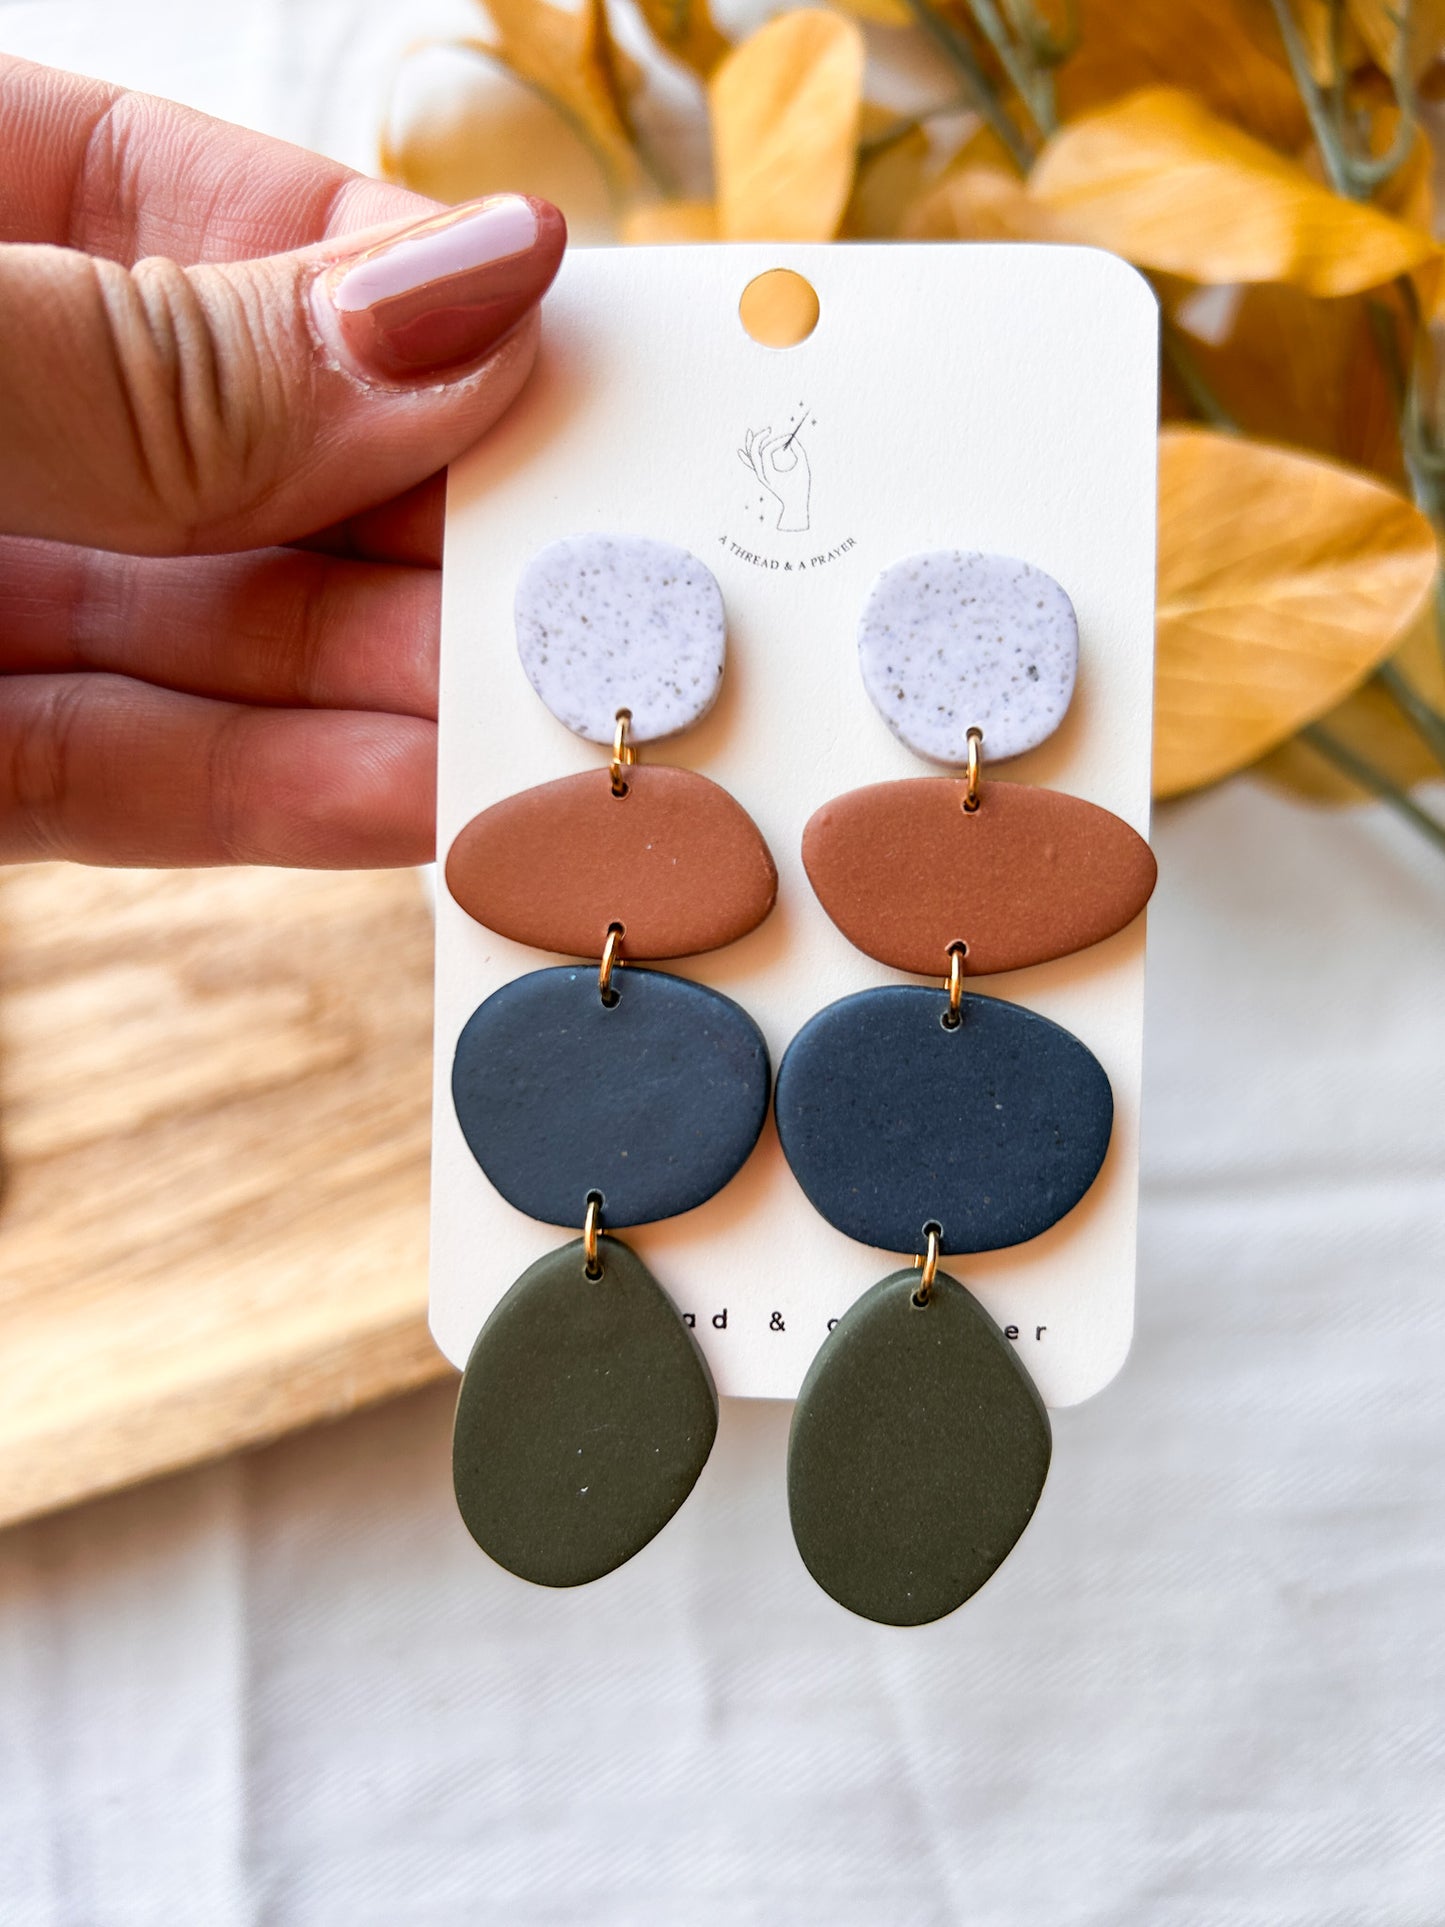 Fall Style Large Natural Style Earrings | Fall Fashion | Autumn Earrings | Statement Earrings | Lightweight